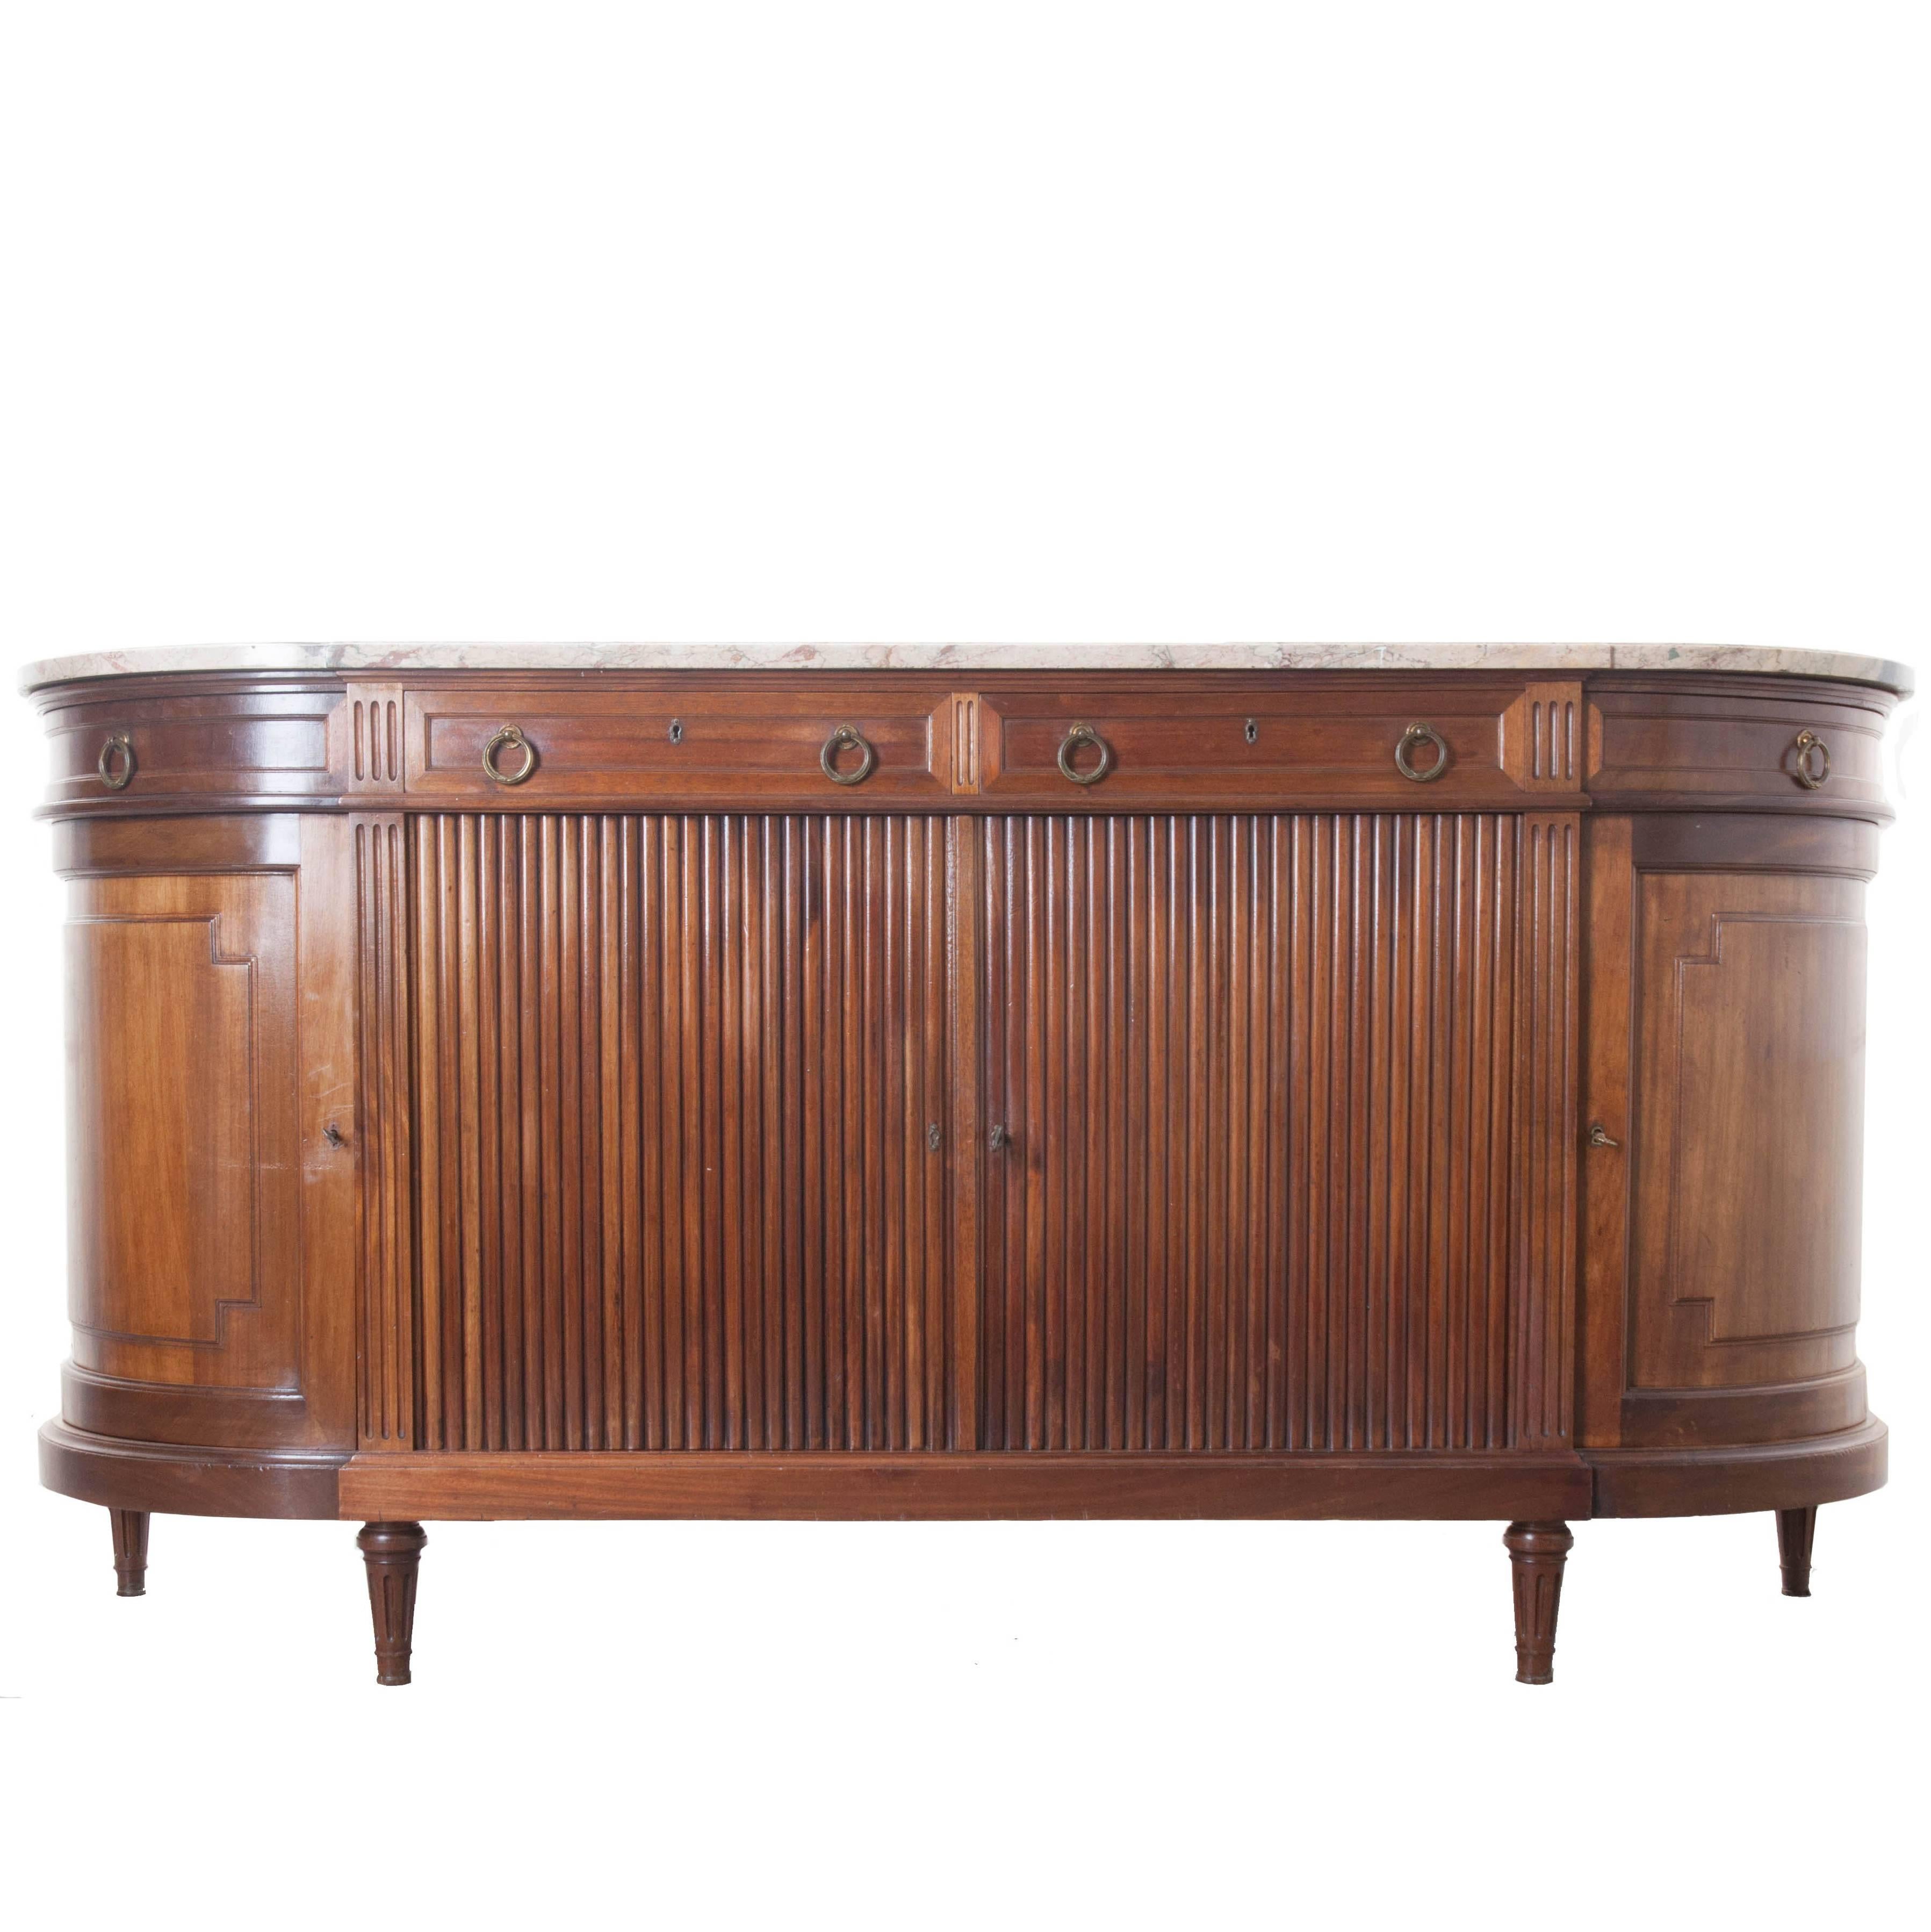 French 19th Century Demilune Mahogany Enfilade with Marble Top